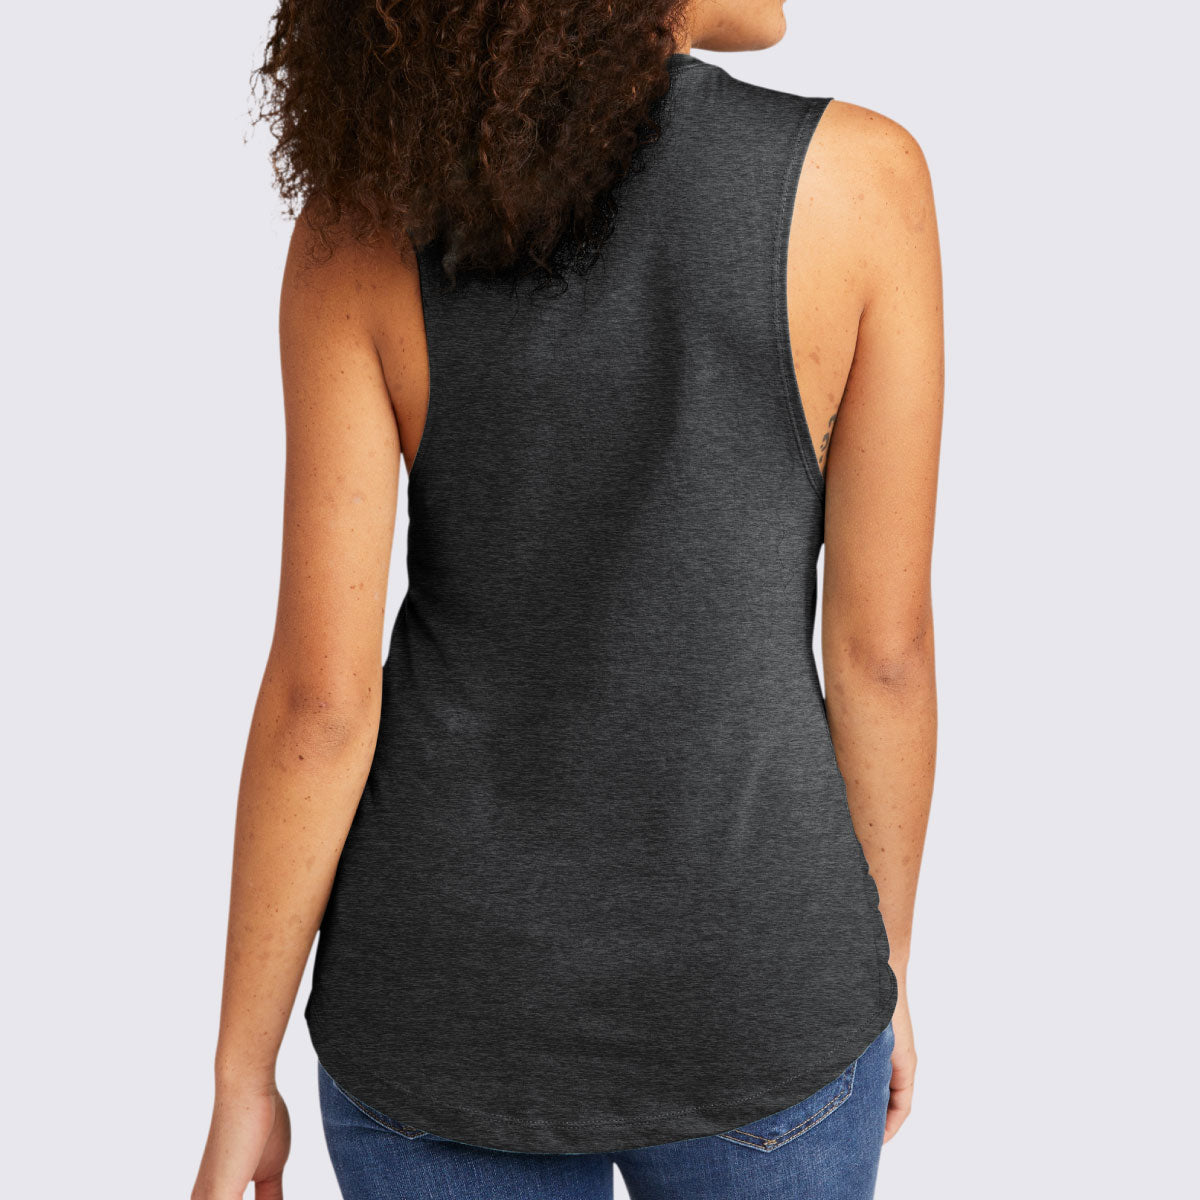 5am Club Women’s Fitted V.I.T.™ Festival Tank